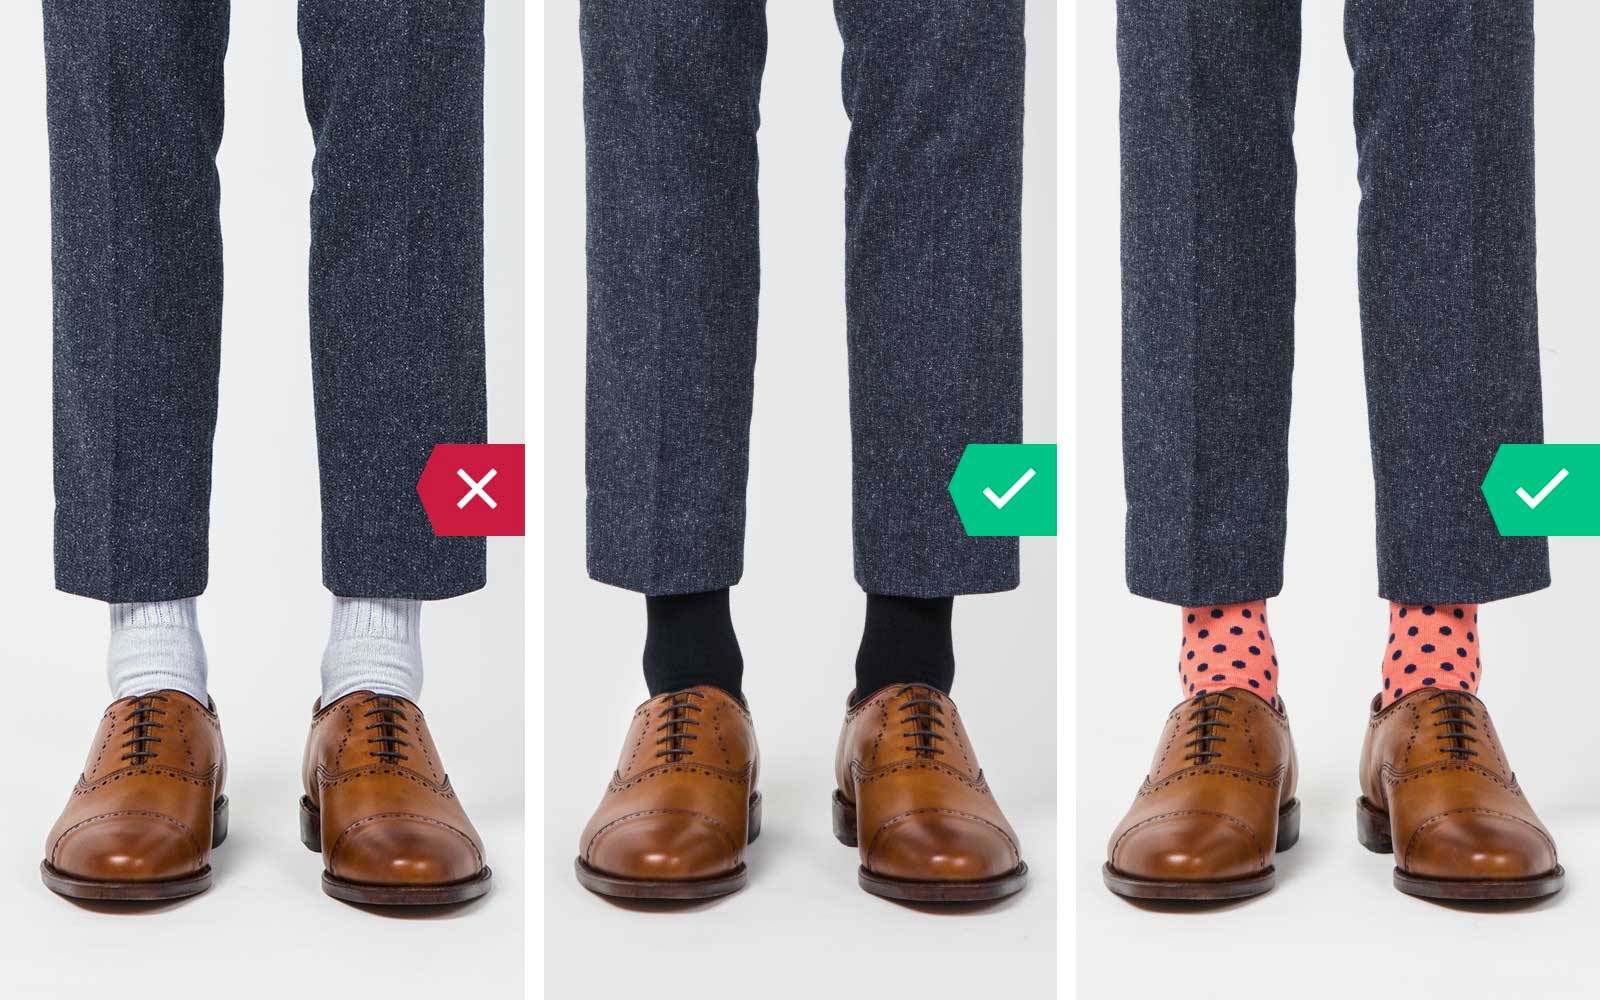 Wearing white, dark and solid socks with dress pants comparison 